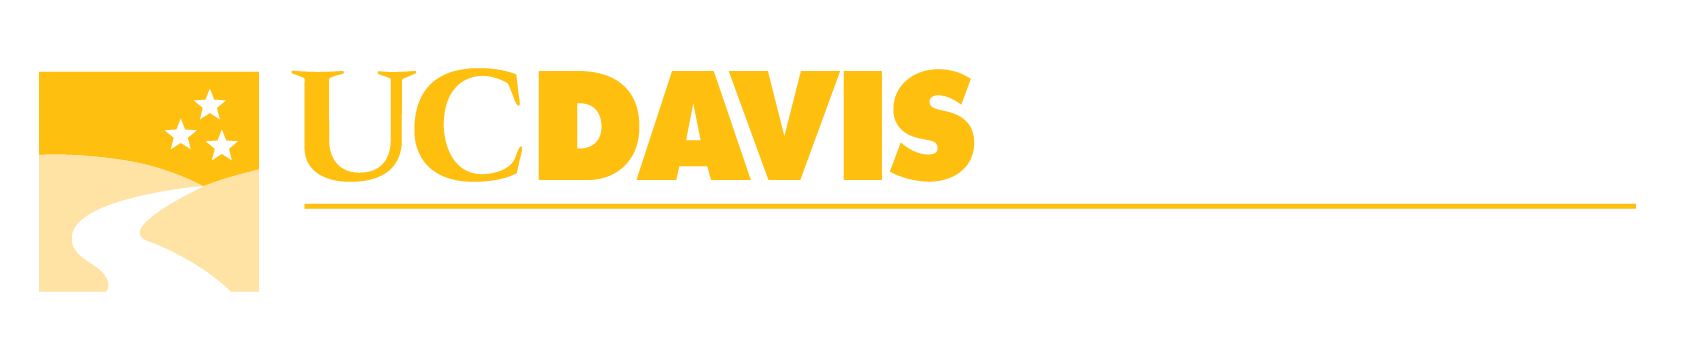 UC Davis College of Letters and Science Logo